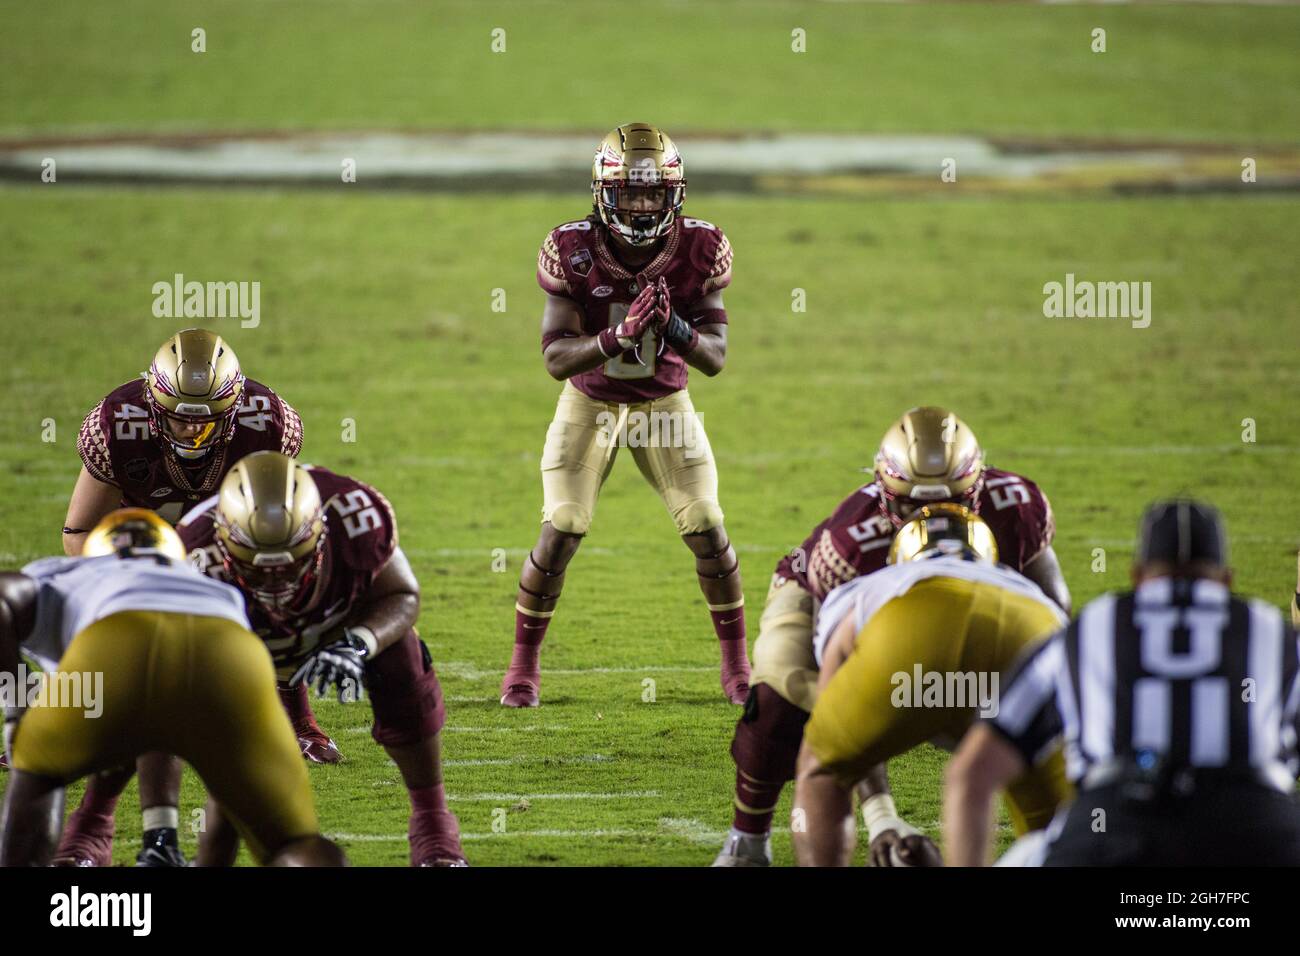 September 5, 2021: Florida State Seminoles running back Treshaun Ward (8)  takes a direct snap in the wild cat formation to score a touchdown during  the NCAA football game between Notre Dame